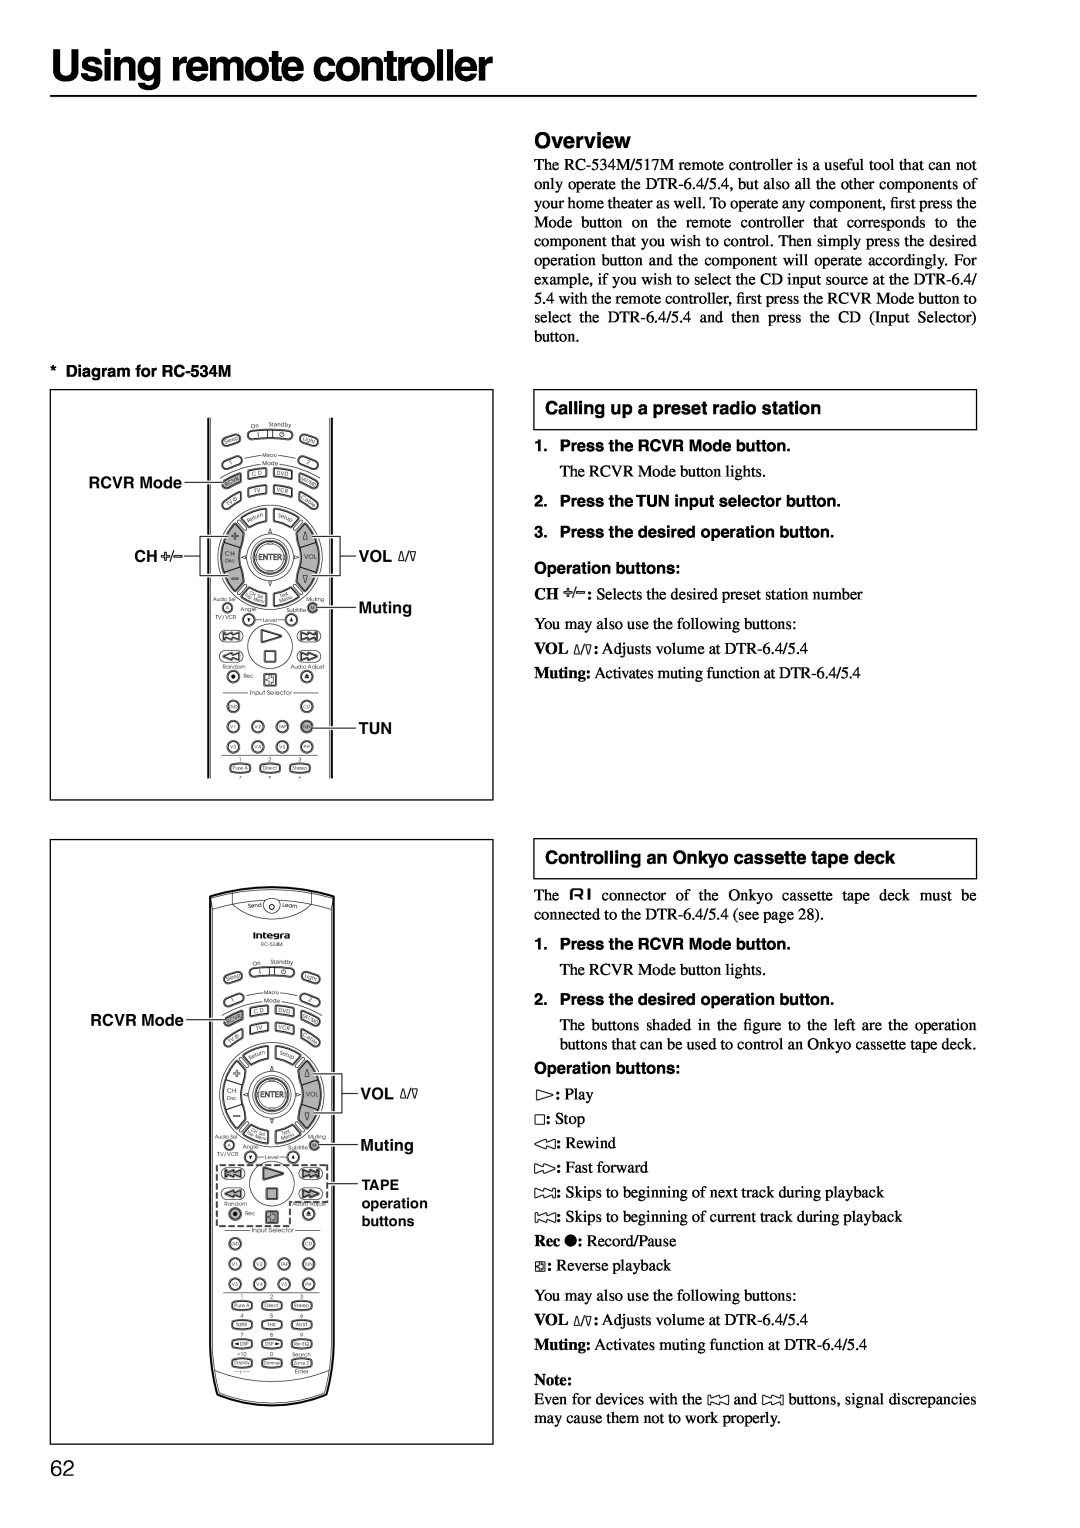 Integra DTR-6.4/5.4 instruction manual Using remote controller, Overview, Calling up a preset radio station 